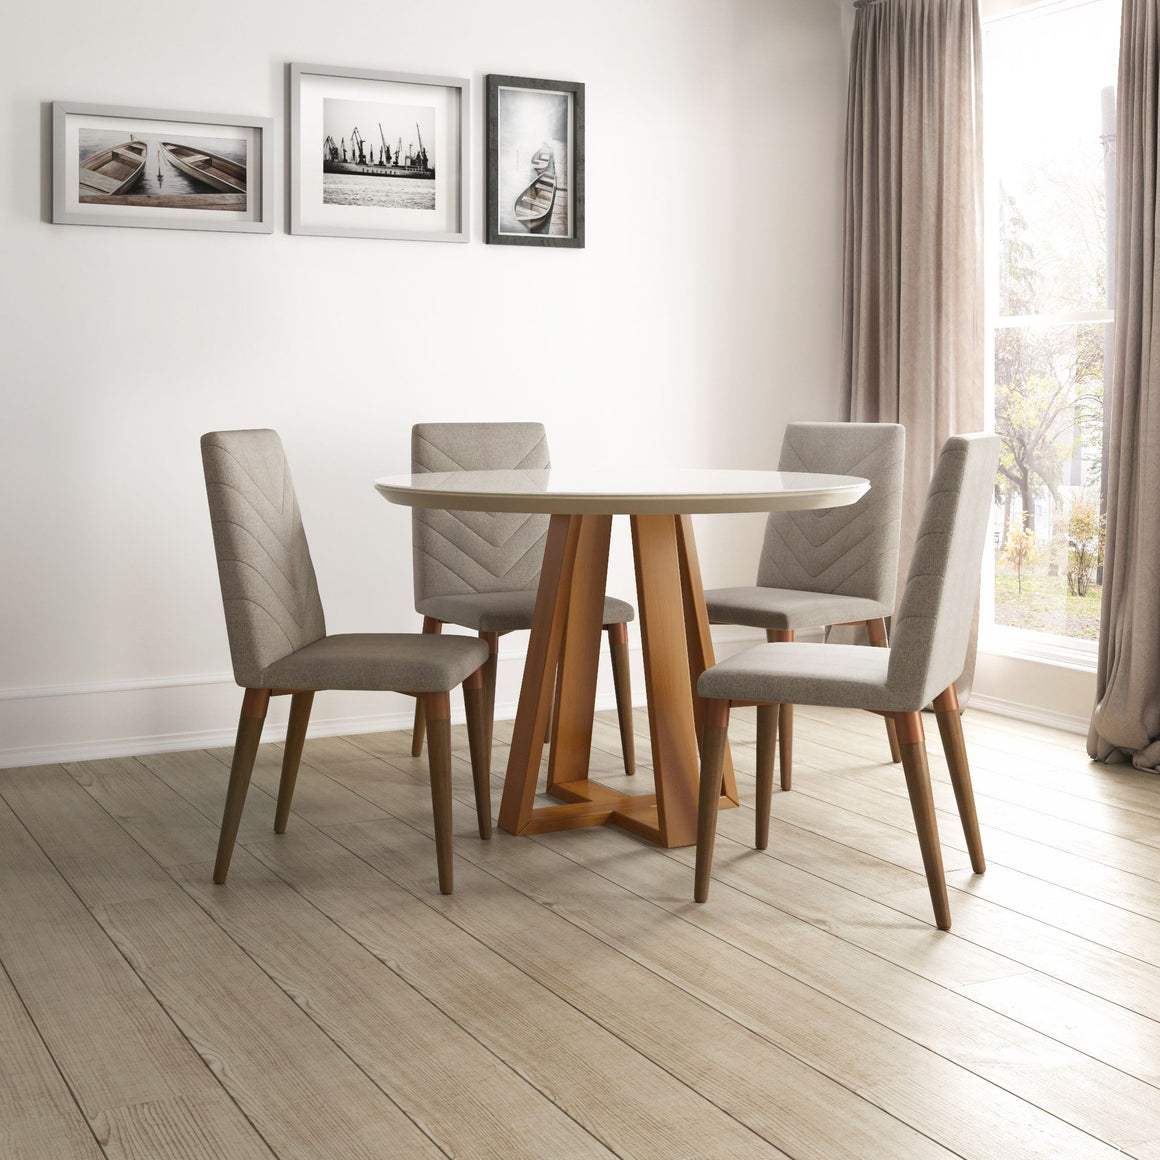 Duffy 45.27 Modern Round Dining Table and Utopia Chevron Dining Chairs in Off White and Grey - Set of 5